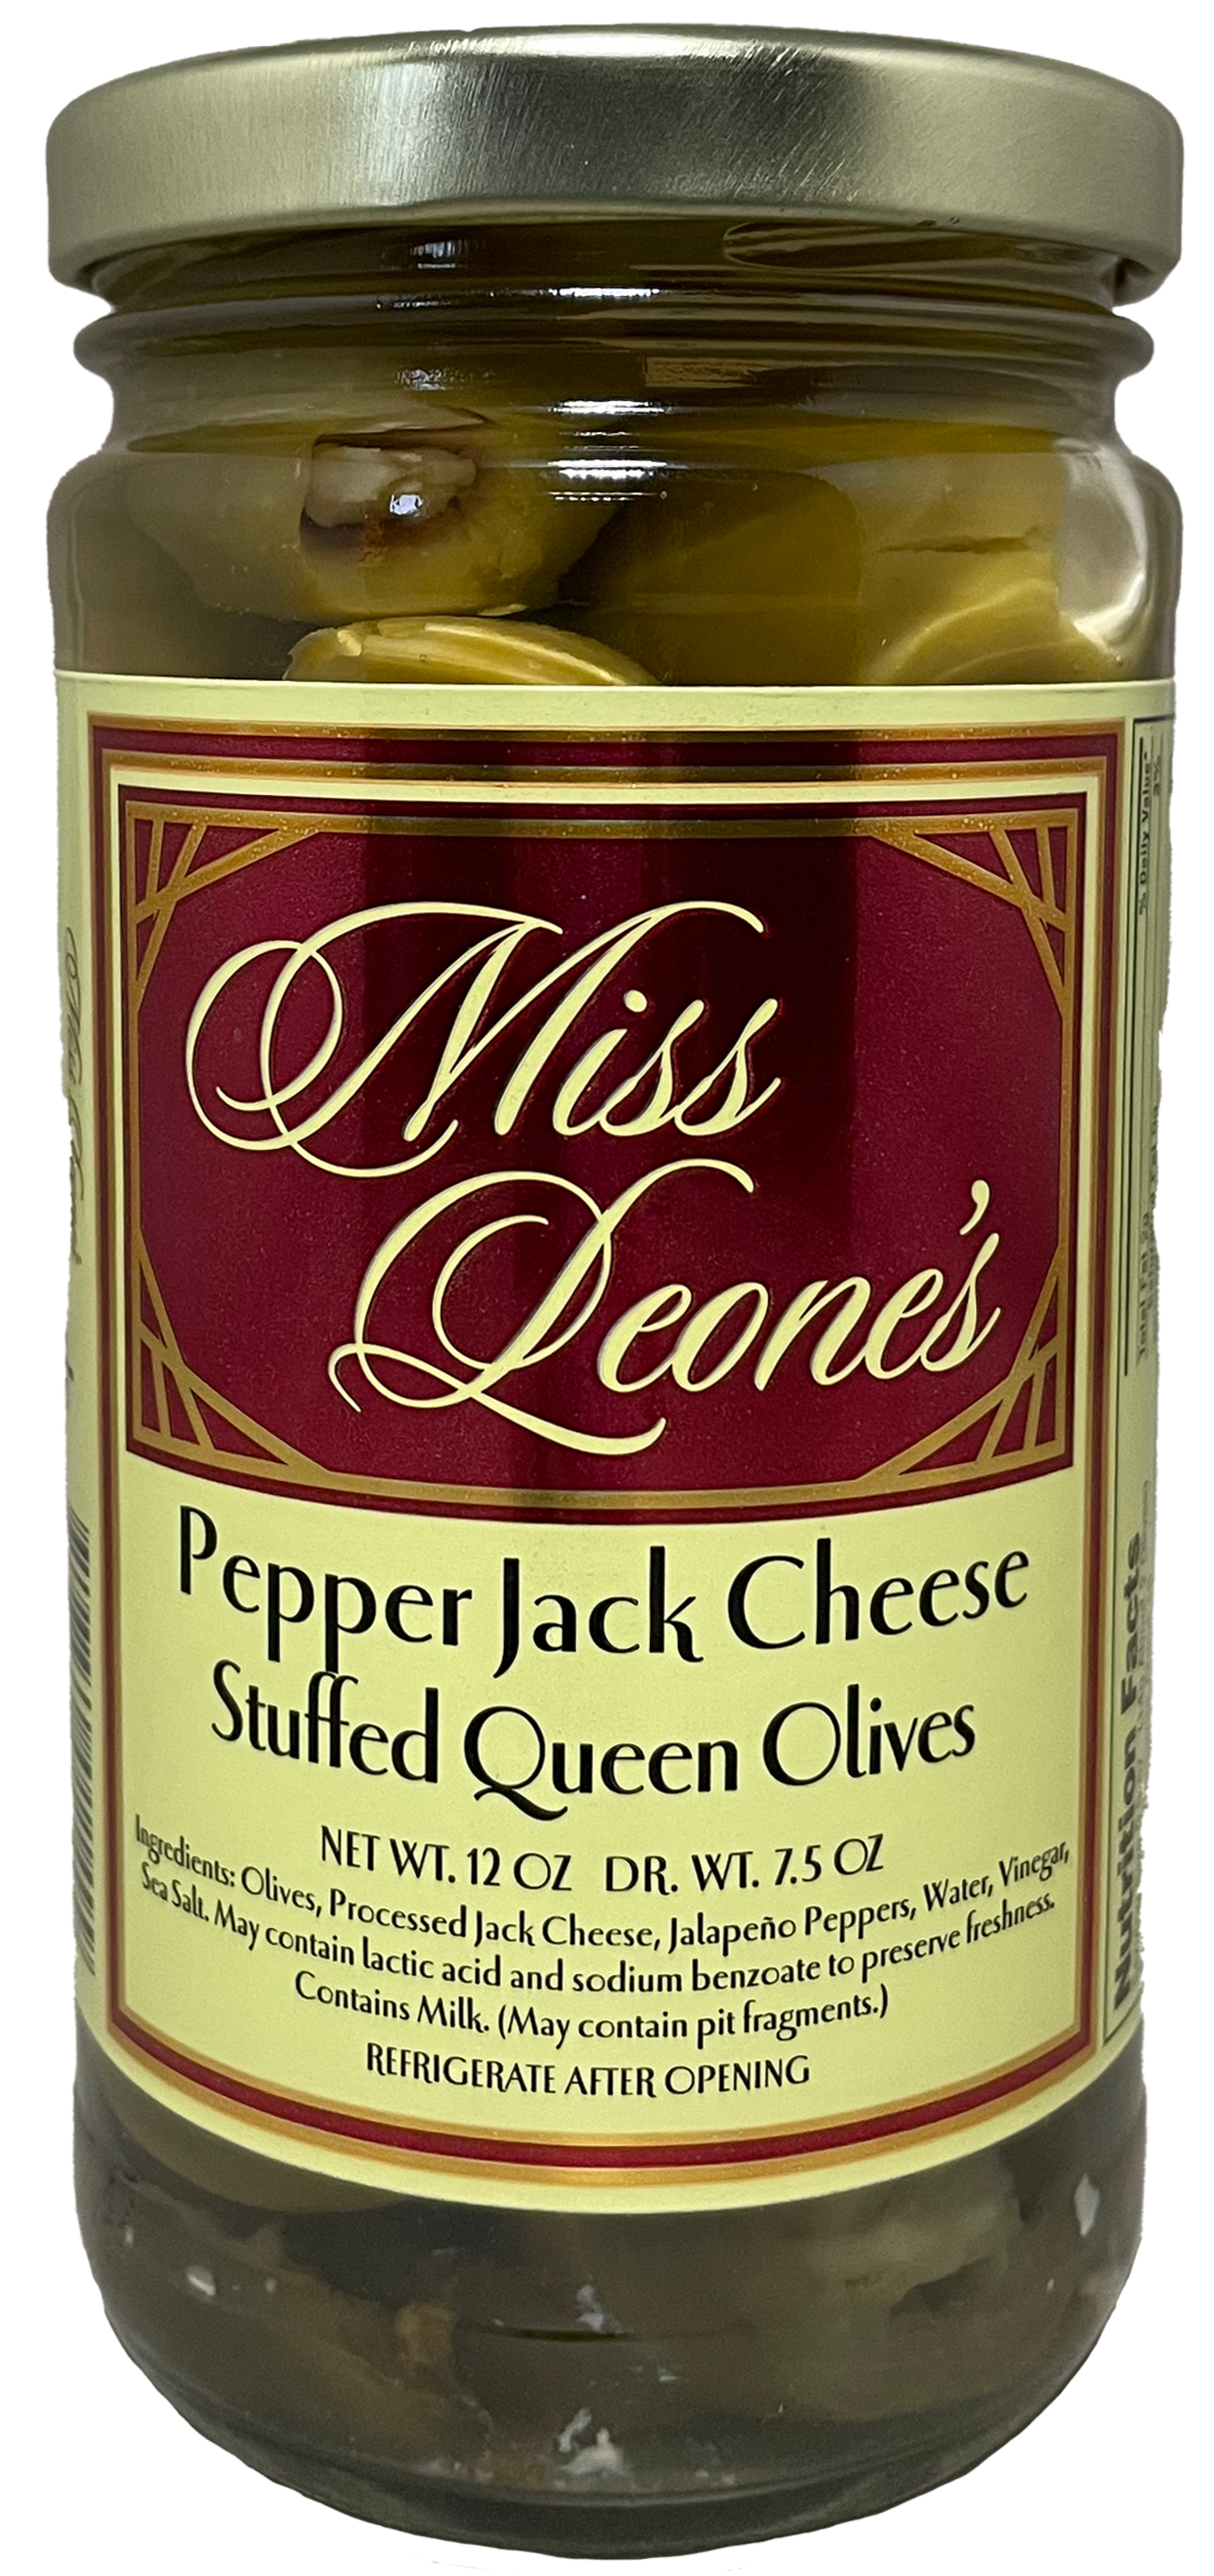 Pepper Jack Cheese Stuffed Queen Olives *NEW LOWER PRICE*